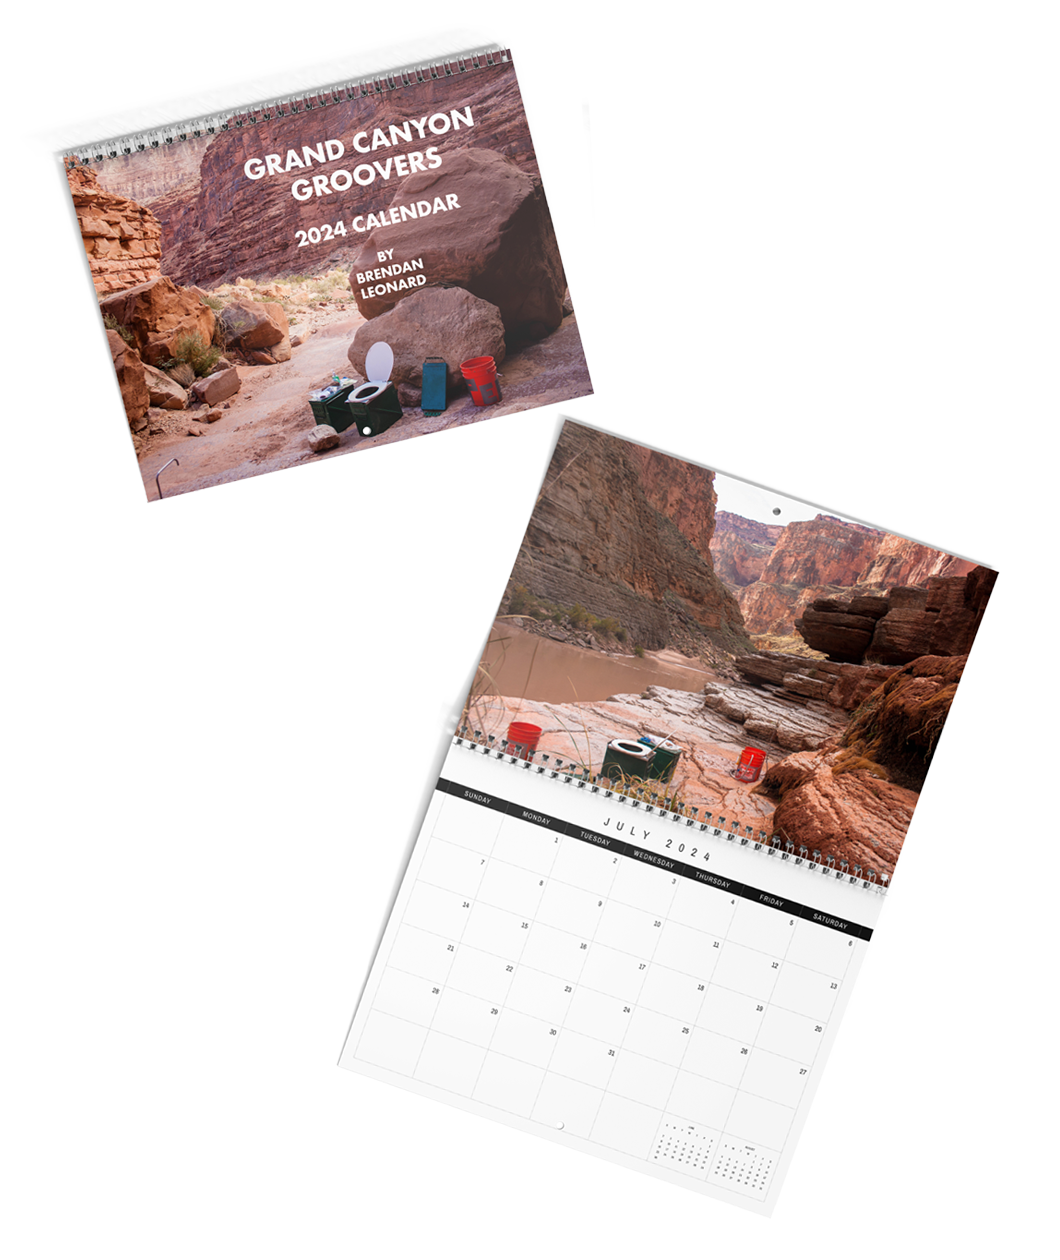 The over of the Grand Canyon Groovers 2024 Calendar by Brendan Leonard. The calendar is open to July showing canyon scenery and a groover. 